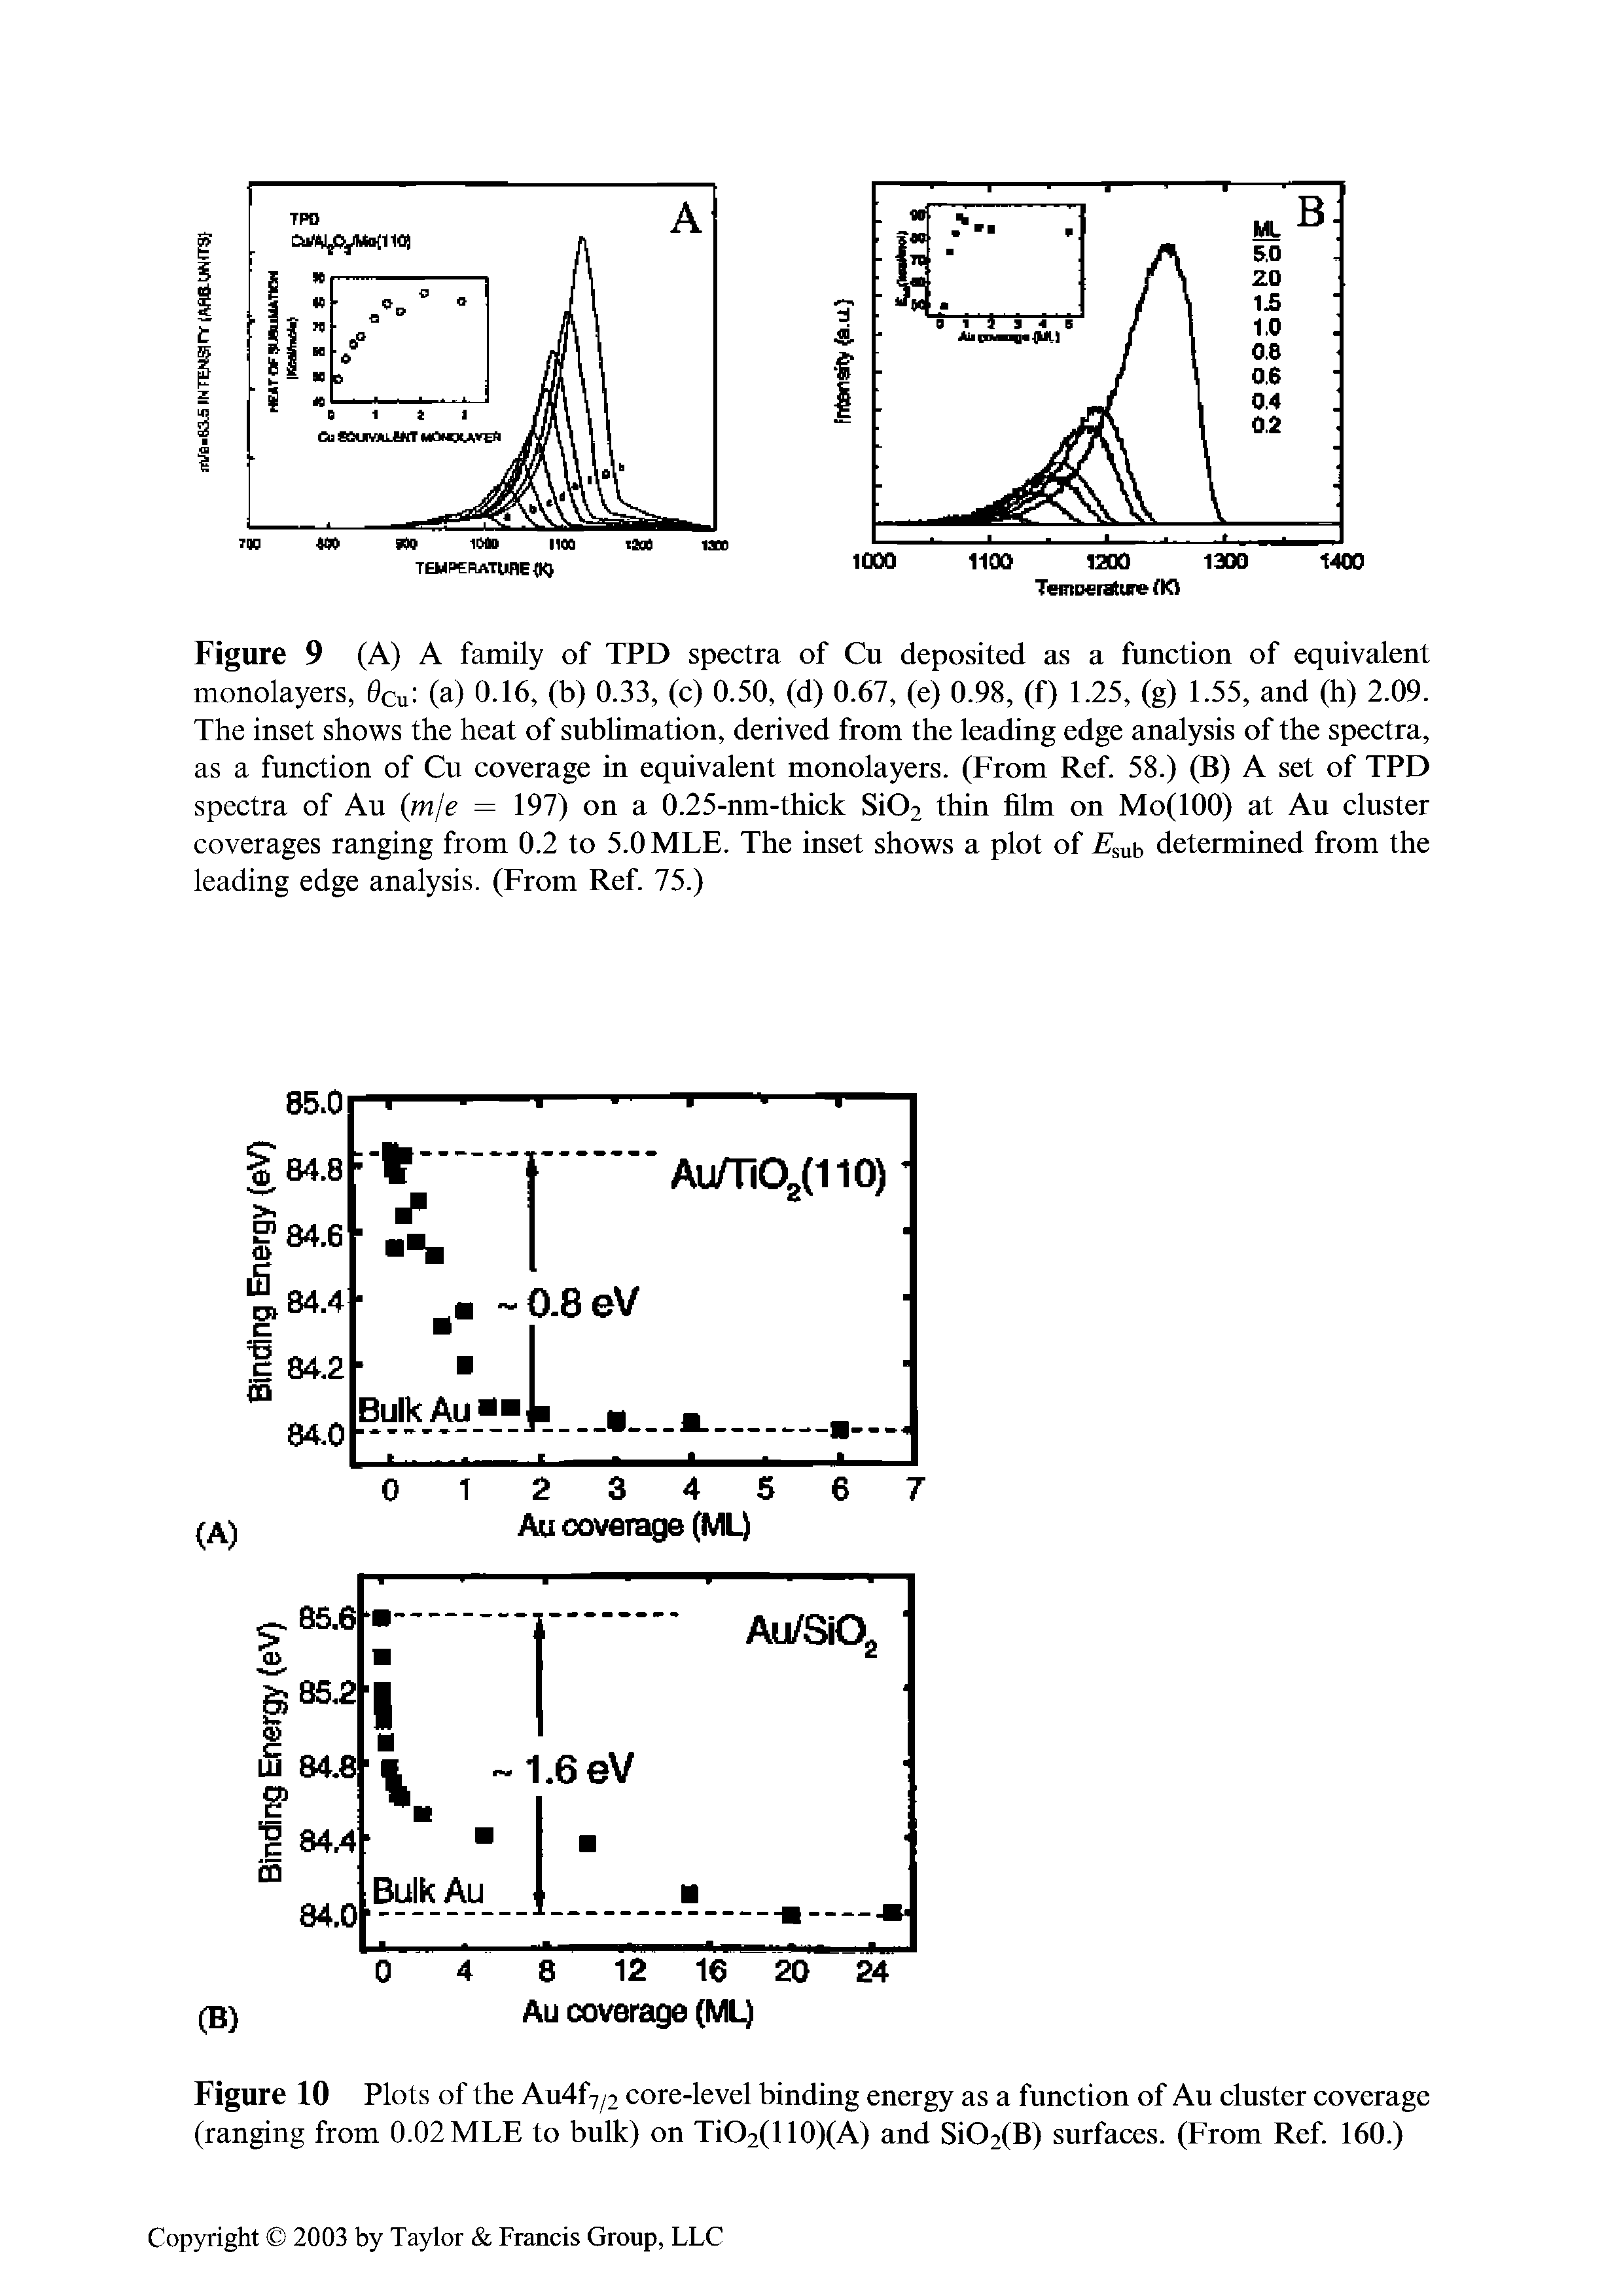 Figure 10 Plots of the Au4f7/2 core-level binding energy as a function of Au cluster coverage (ranging from 0.02 MLE to bulk) on TiO2(110)(A) and Si02(B) surfaces. (From Ref. 160.)...